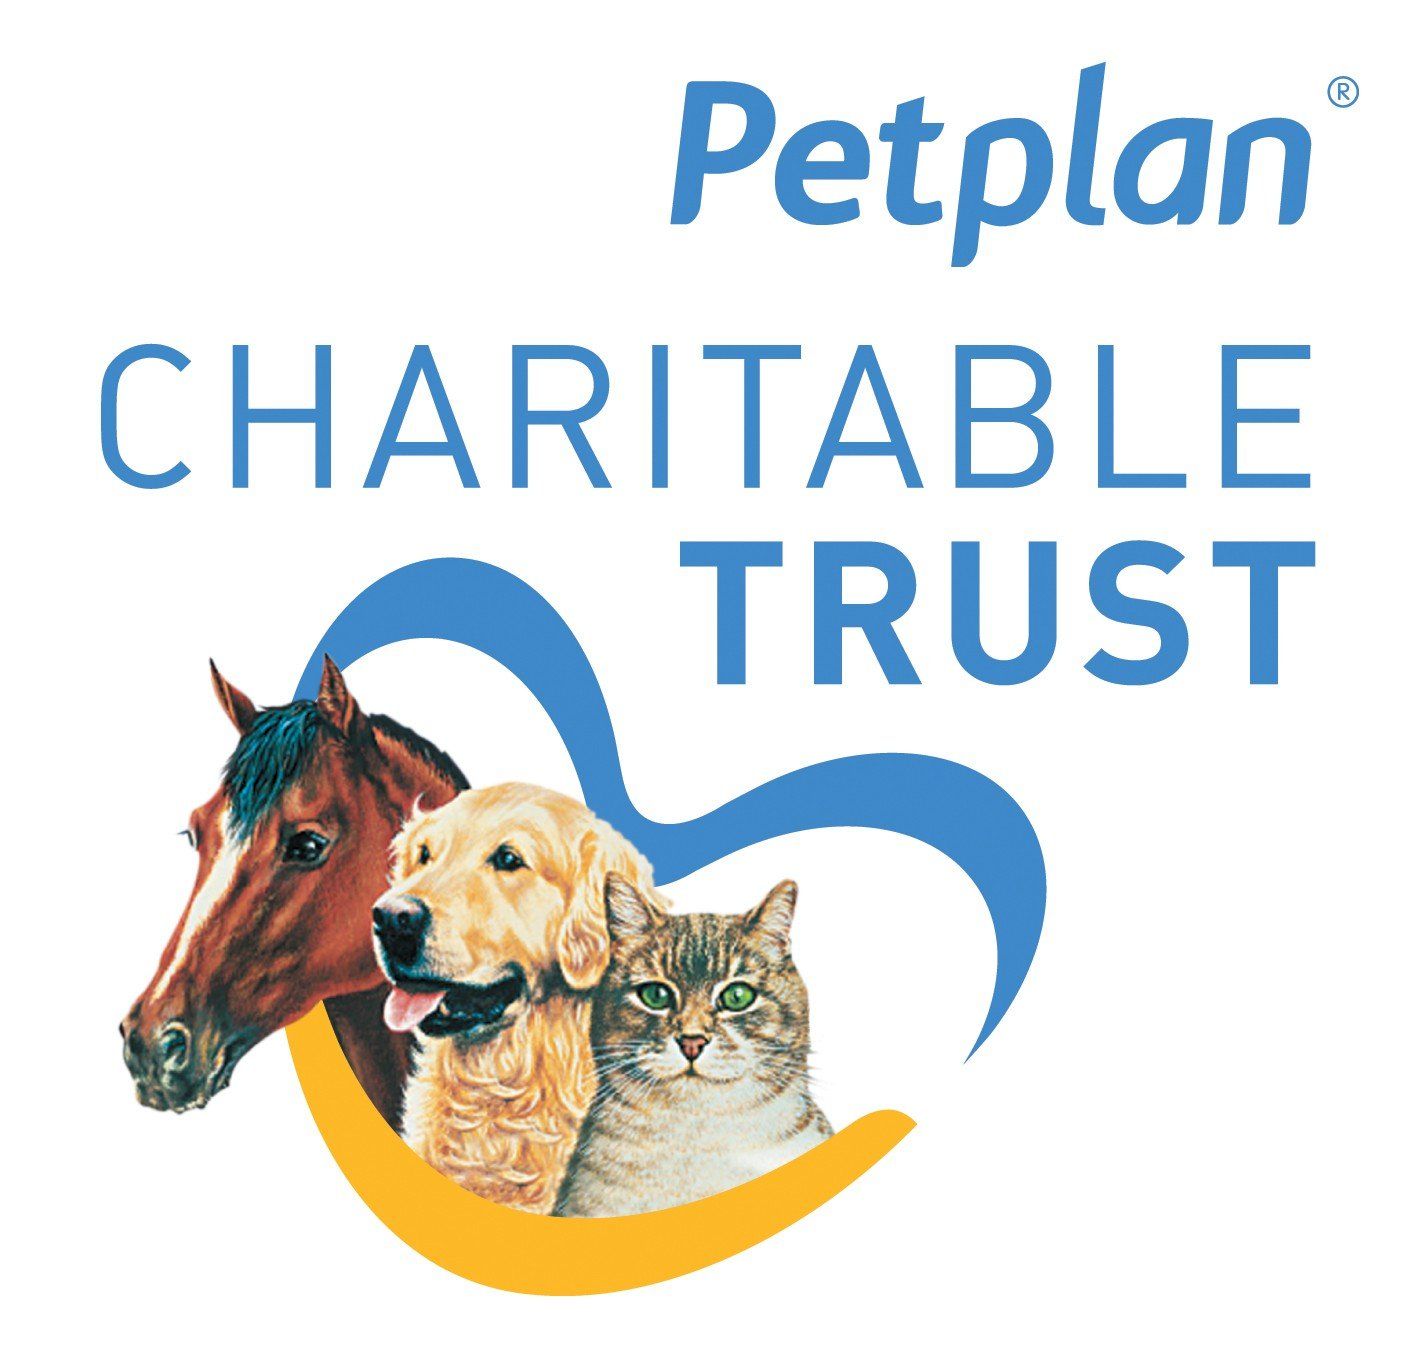 Major gifts and charitable trusts like Petplan can help provide extra accommodation for our donkeys